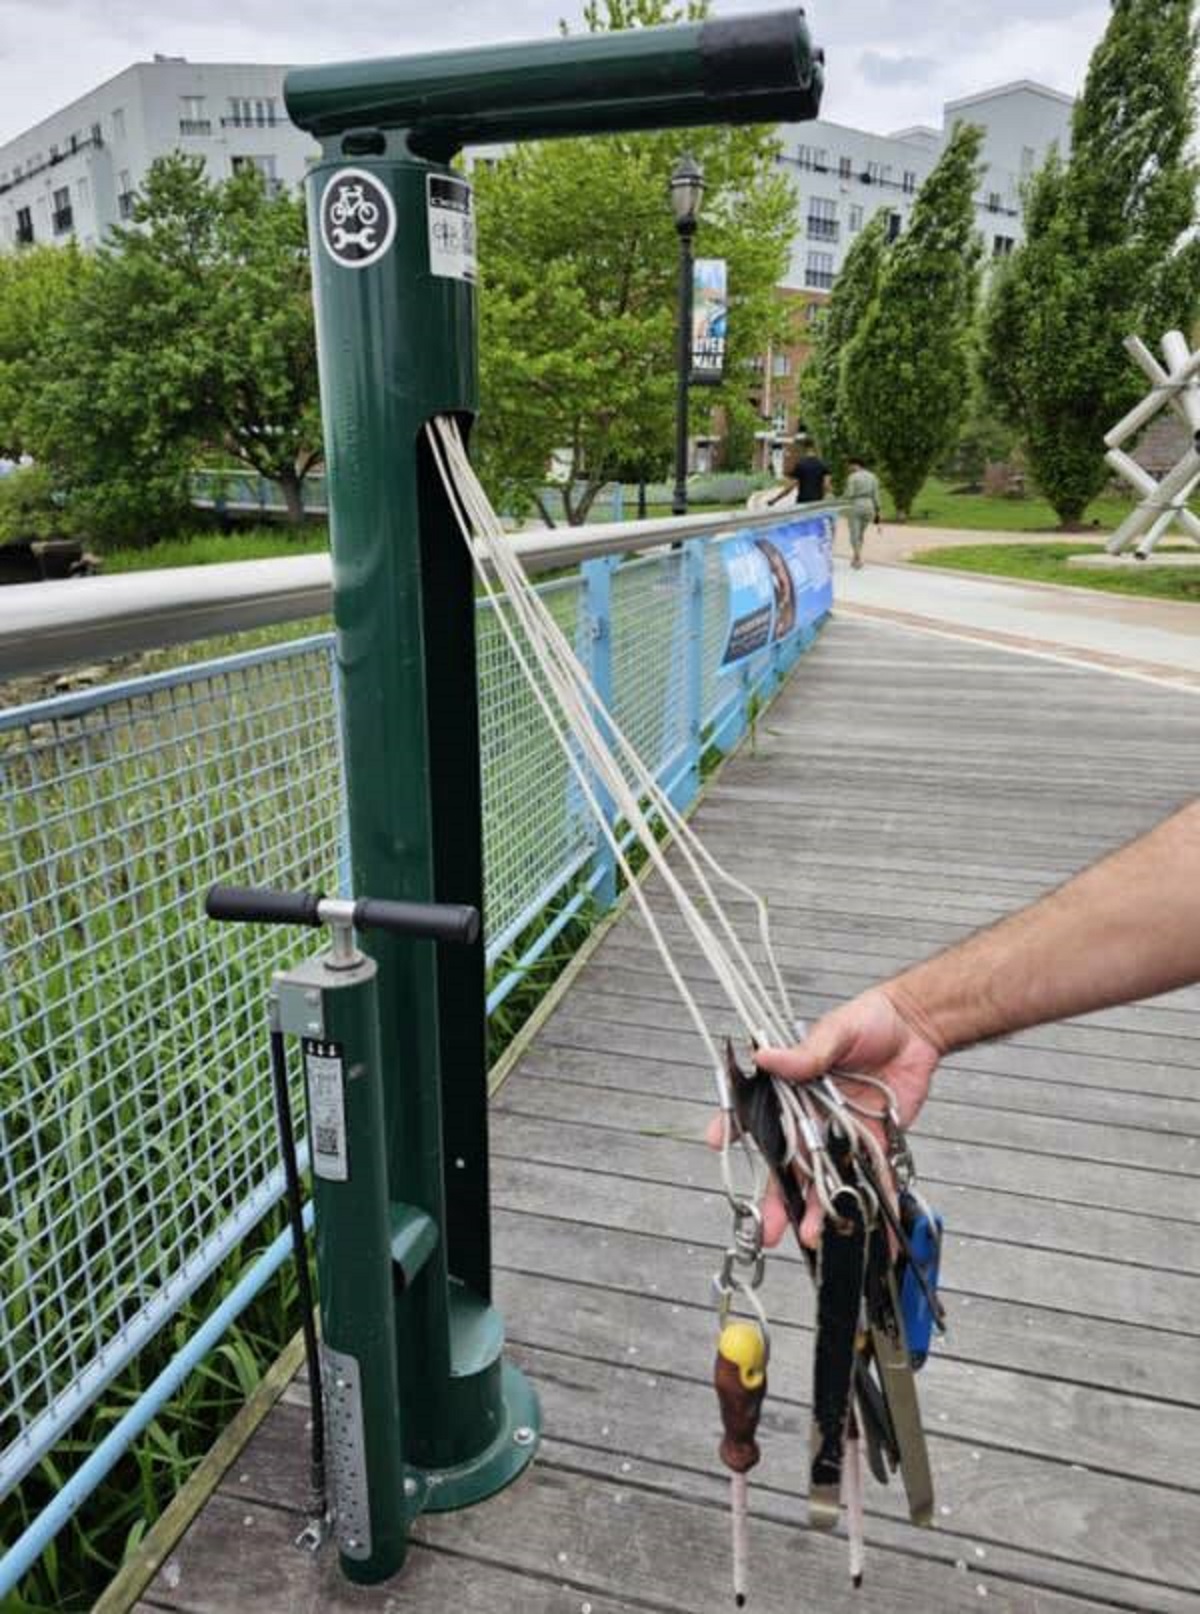 In Canada, there's bike repair equipment on the bike paths, in case you run into trouble.